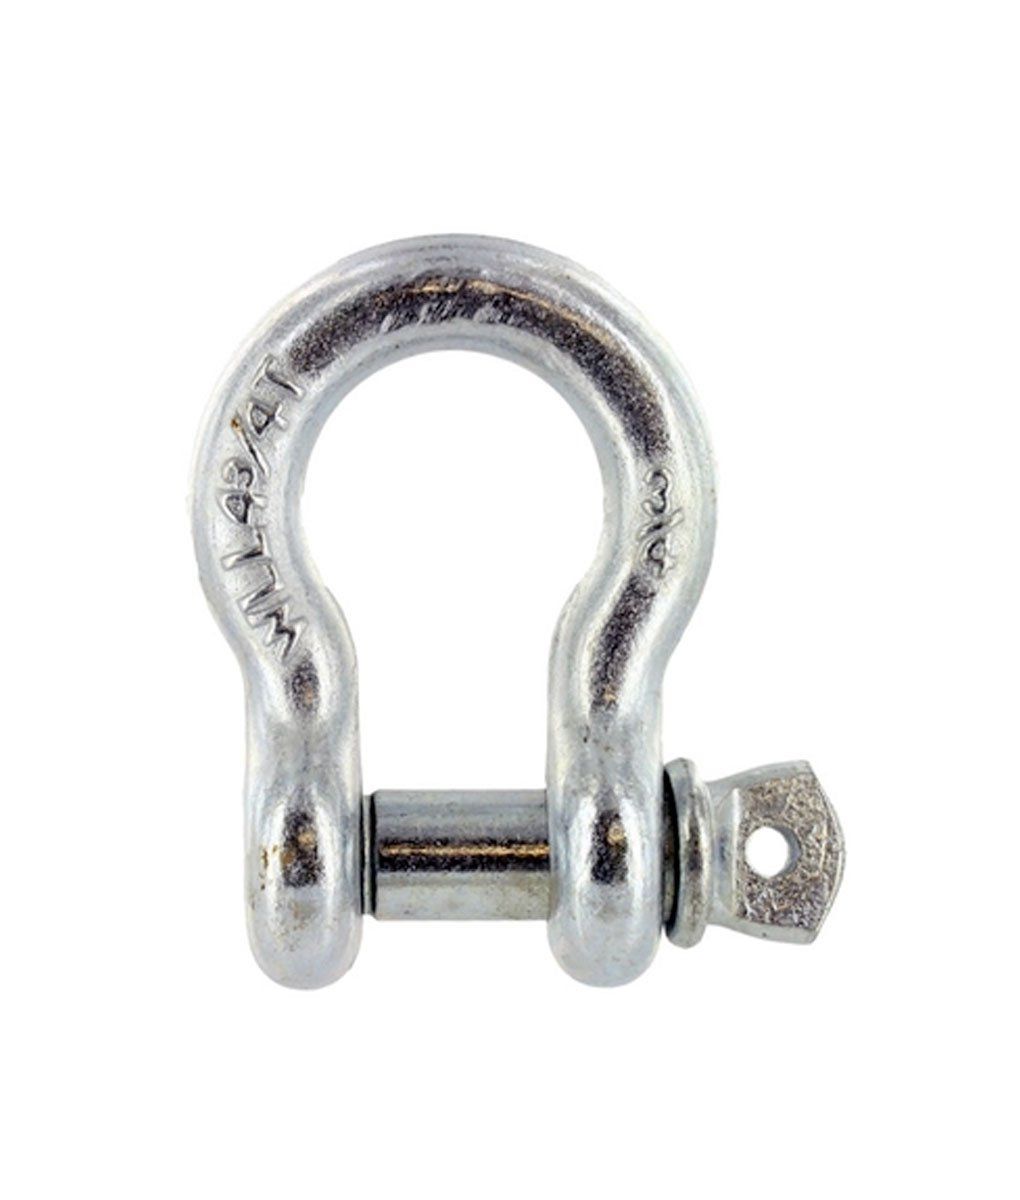 All-Pro Off-Road 3/4 in Steel D-Ring Shackle